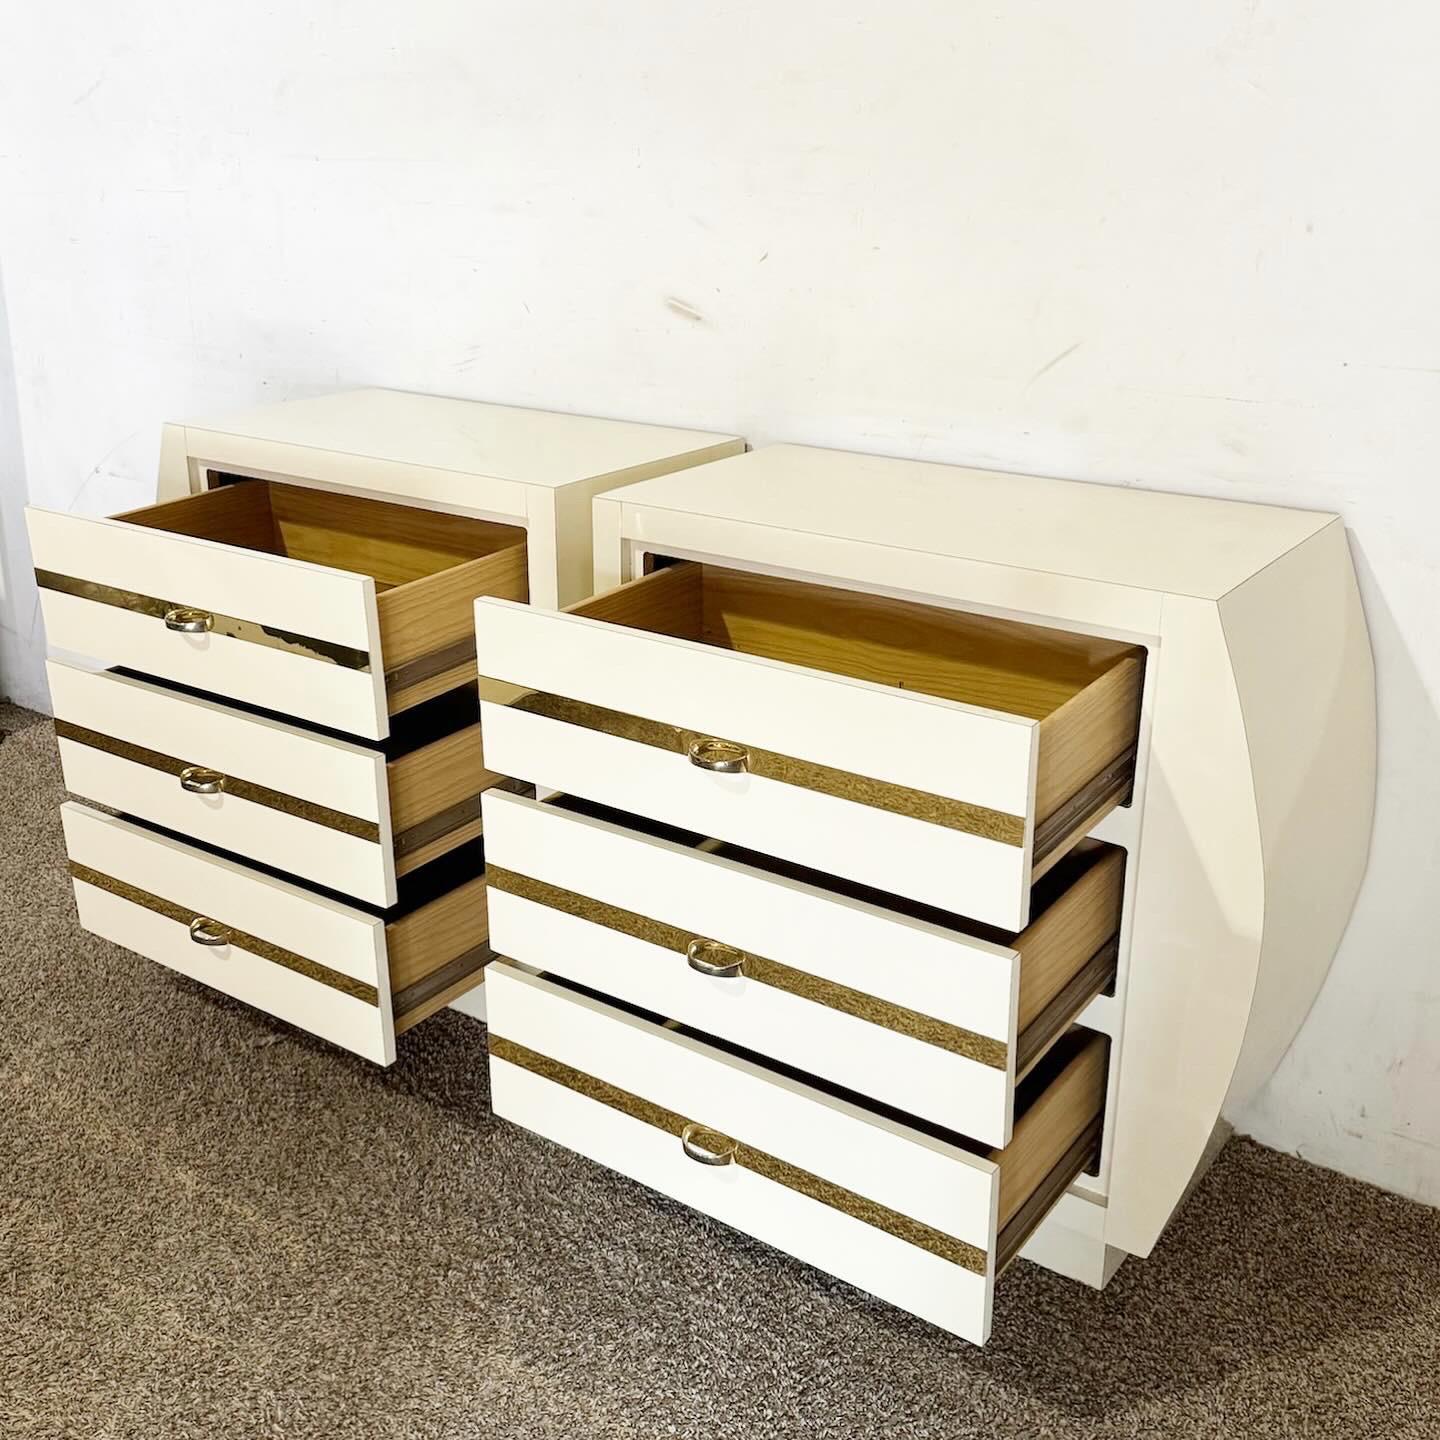 20th Century Postmodern Cream Lacquer Laminate Nightstands With Gold Accents- a Pair For Sale